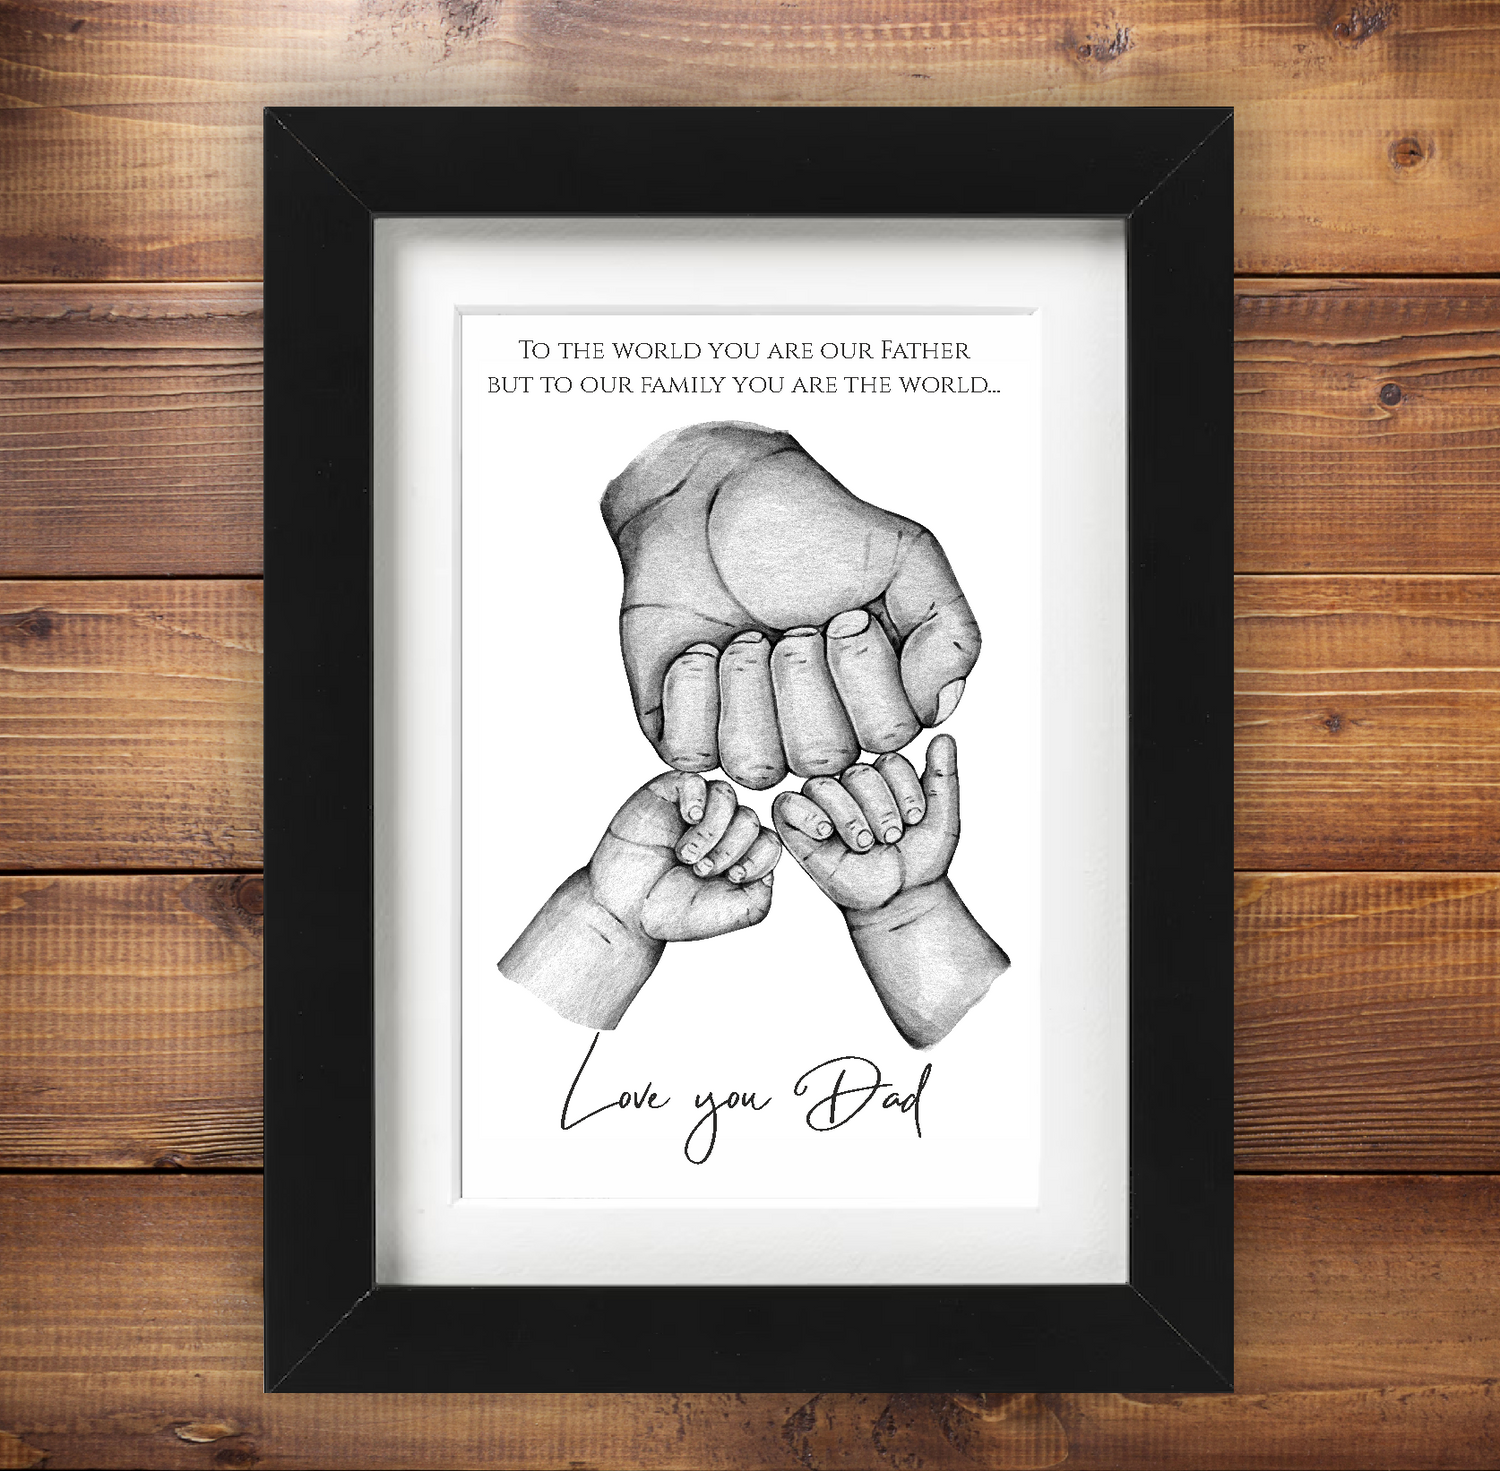 Give dad a special gift this fathers day with the personalised framed print. Simply upload your name(s) or add a special message just for him this Fathers day. We have a wide variety of handmade custom gifts for all occasions, in Ireland